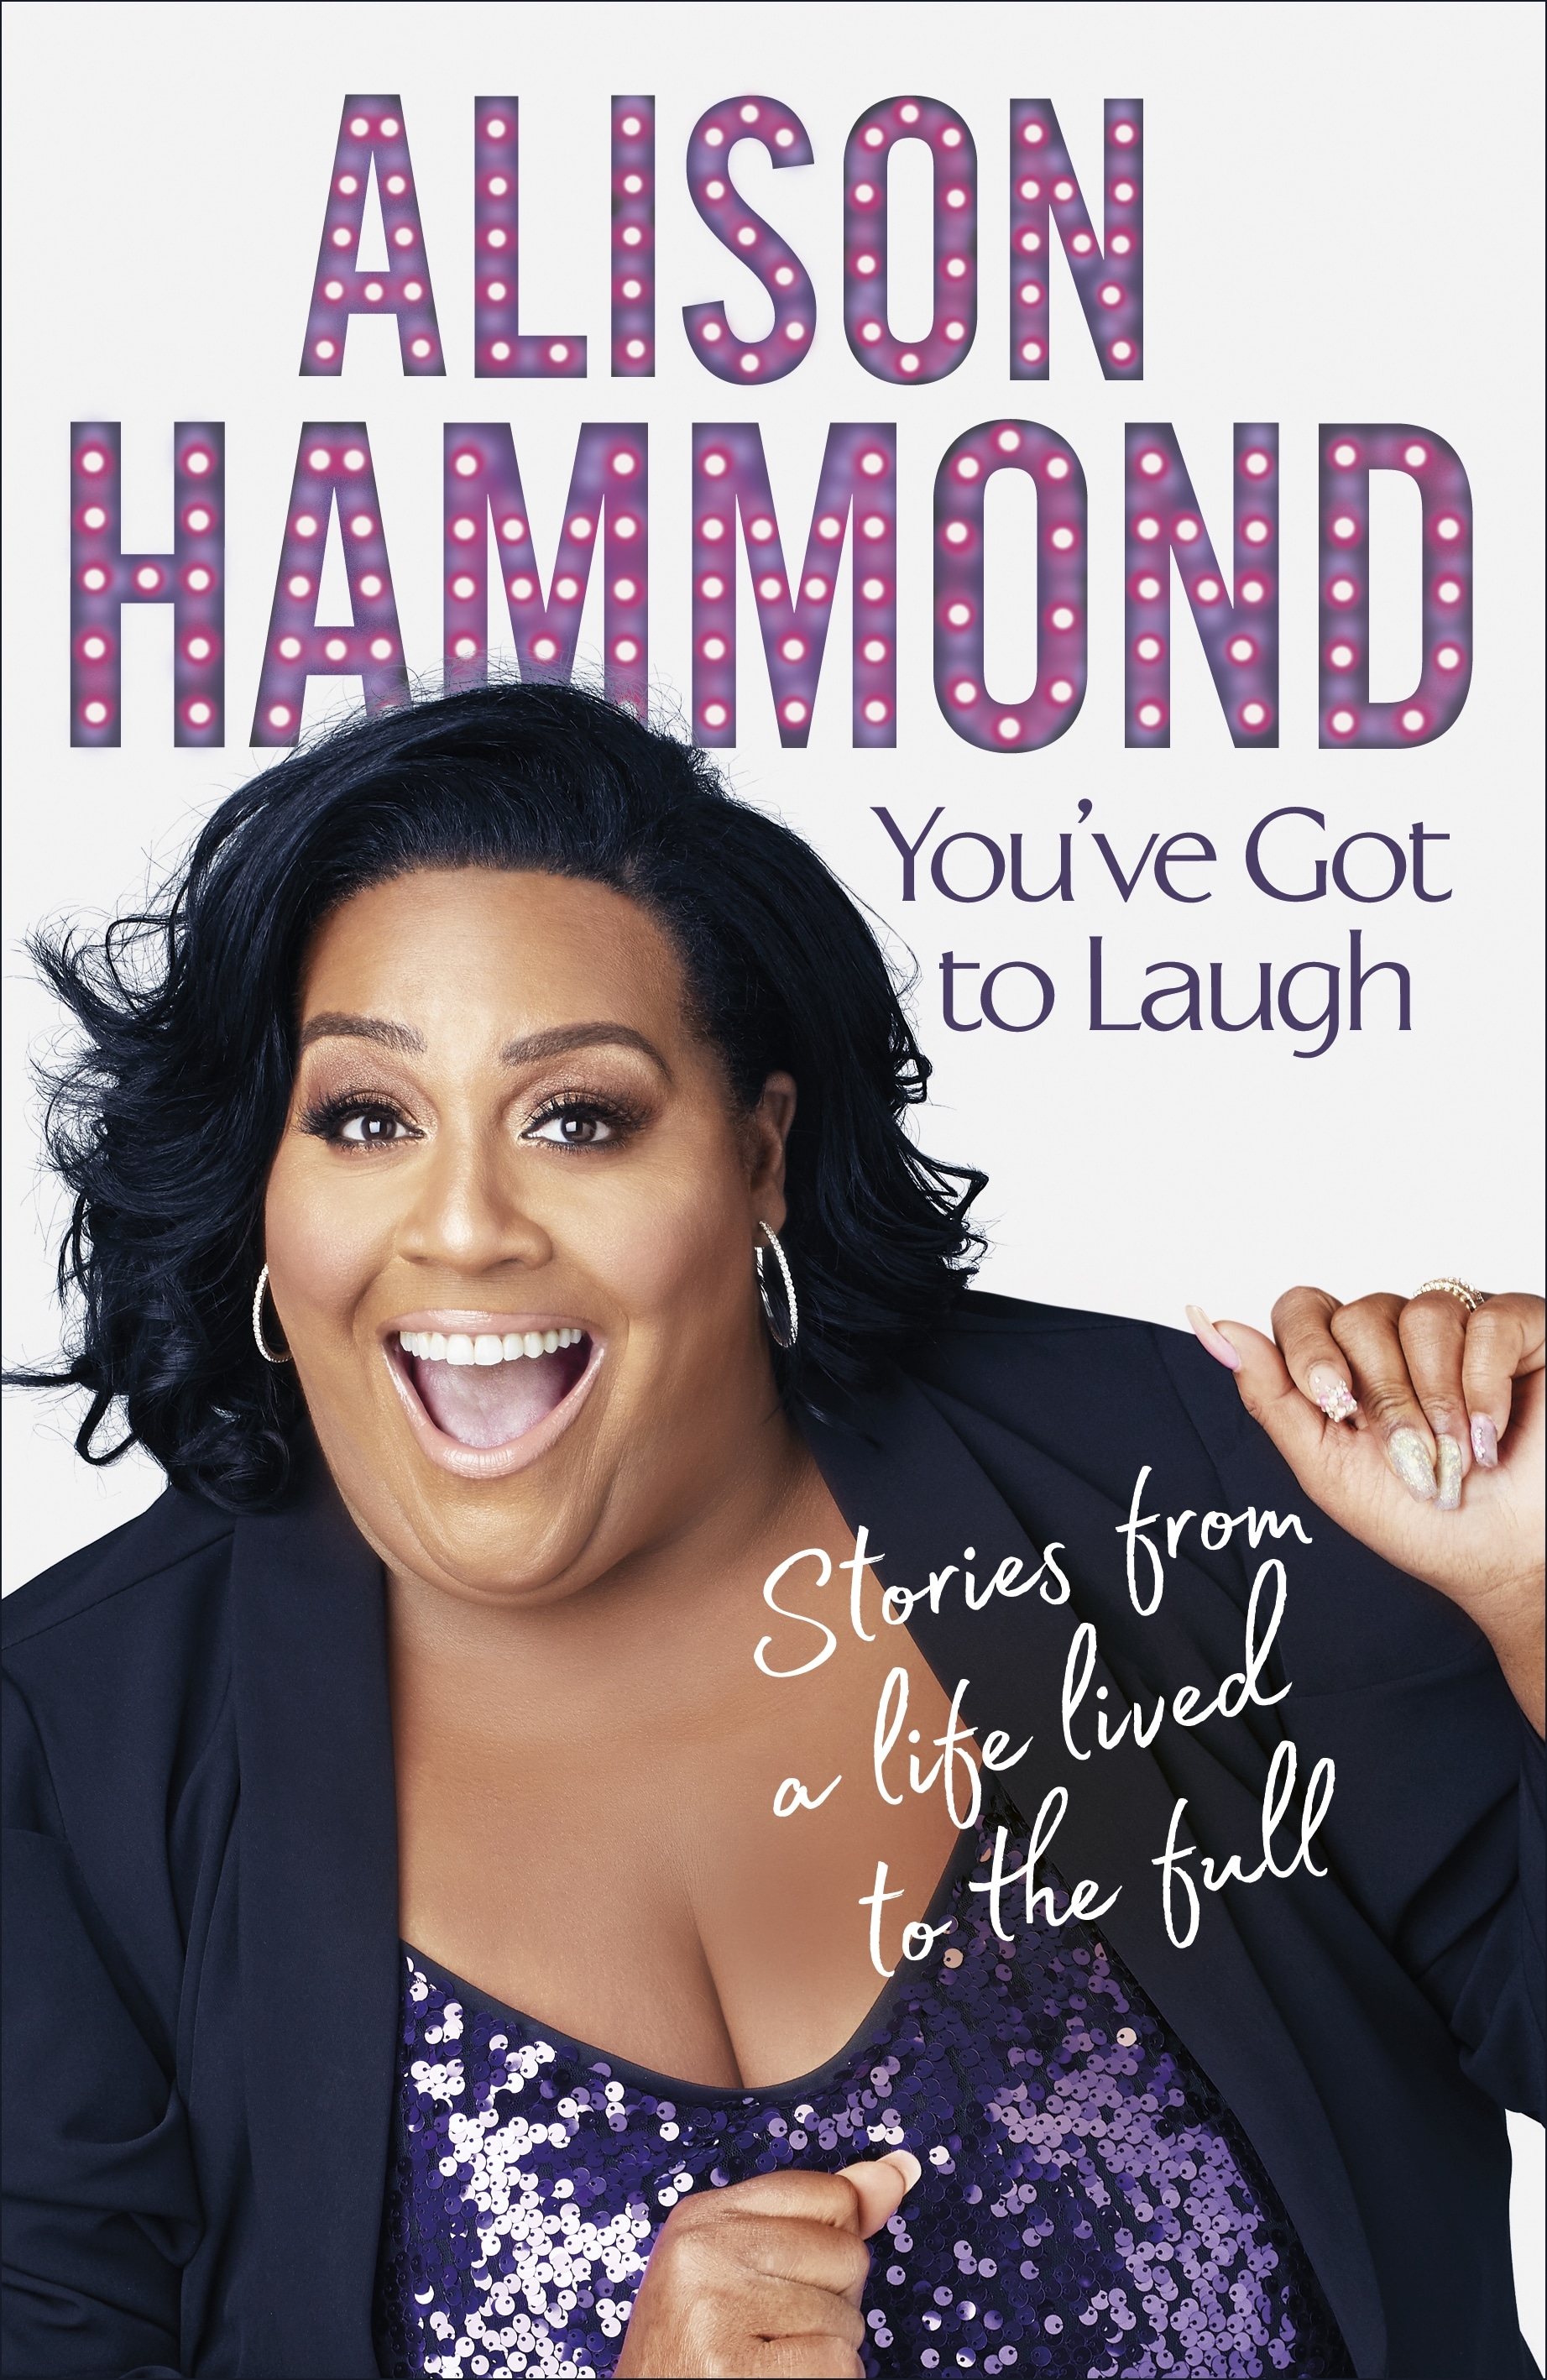 Book “You’ve Got To Laugh” by Alison Hammond — October 14, 2021